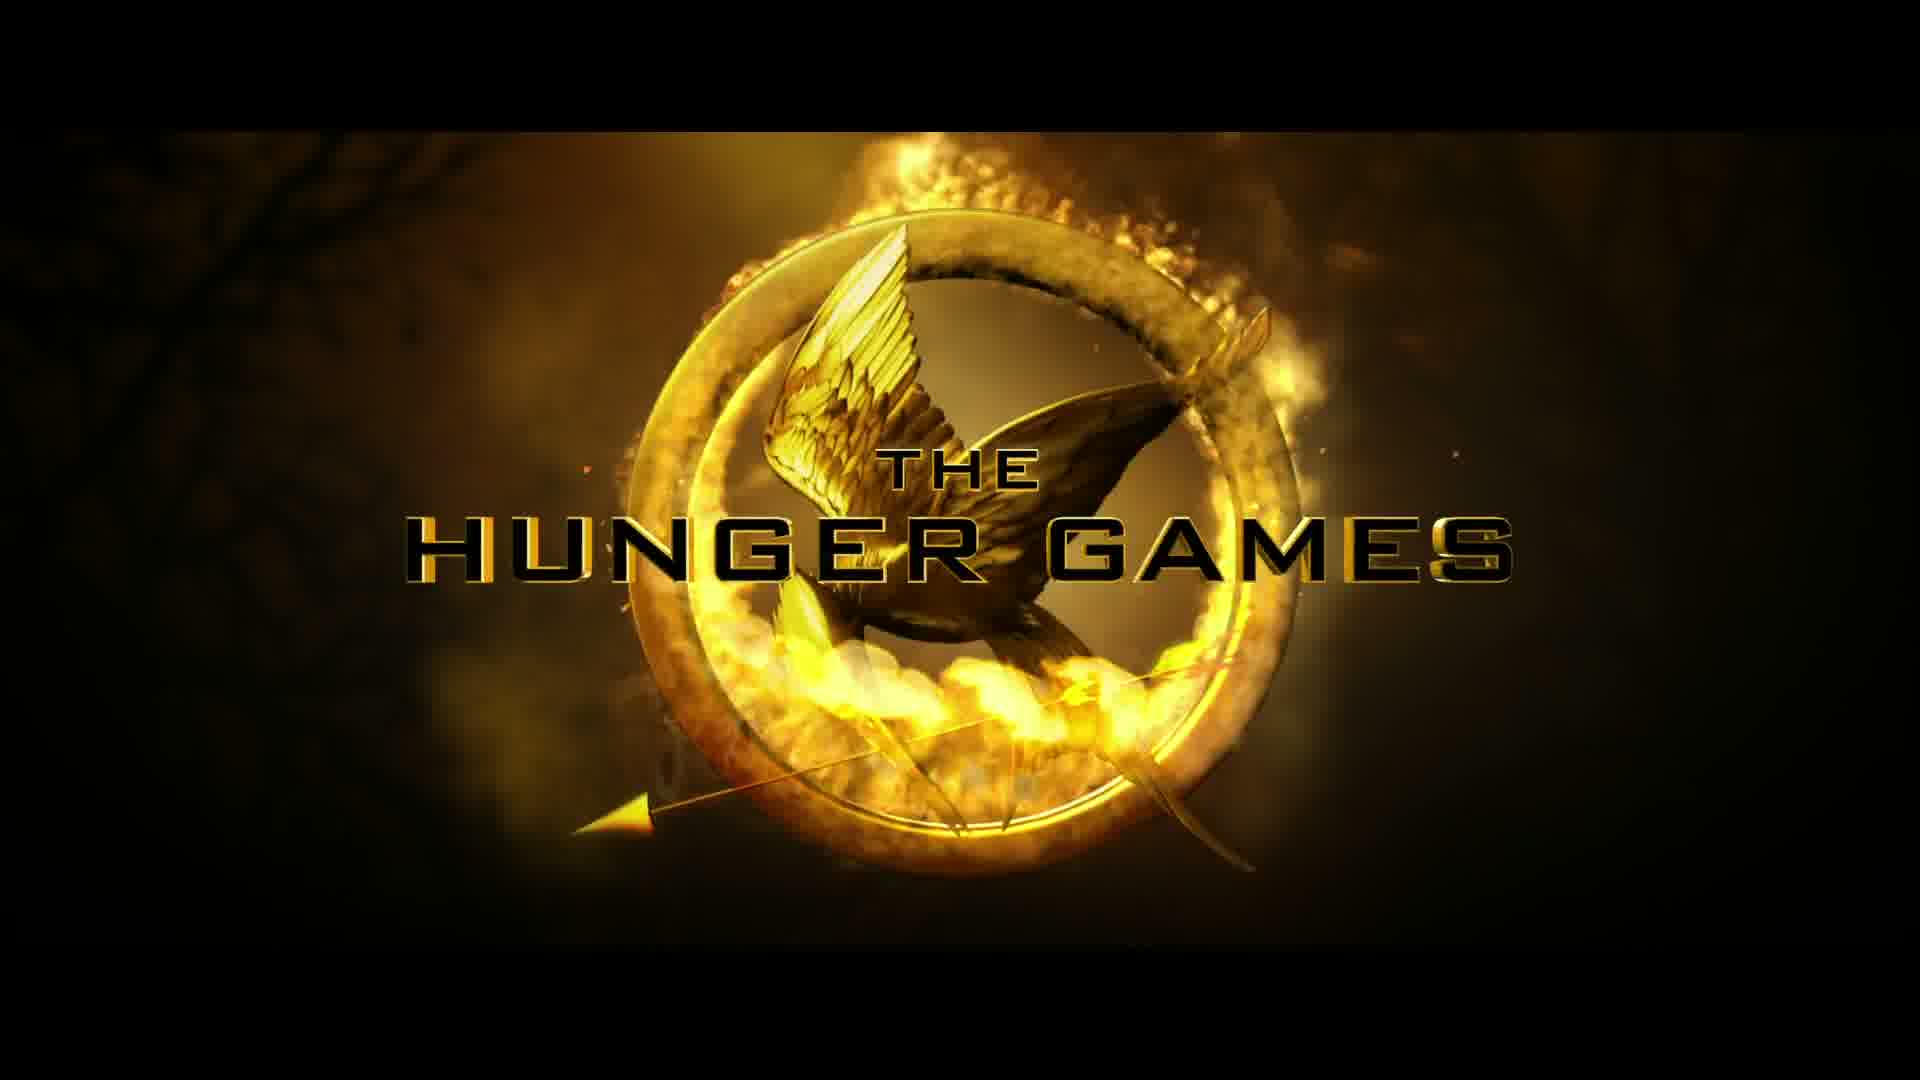 Cato images The Hunger Games trailer 2 HD wallpaper and